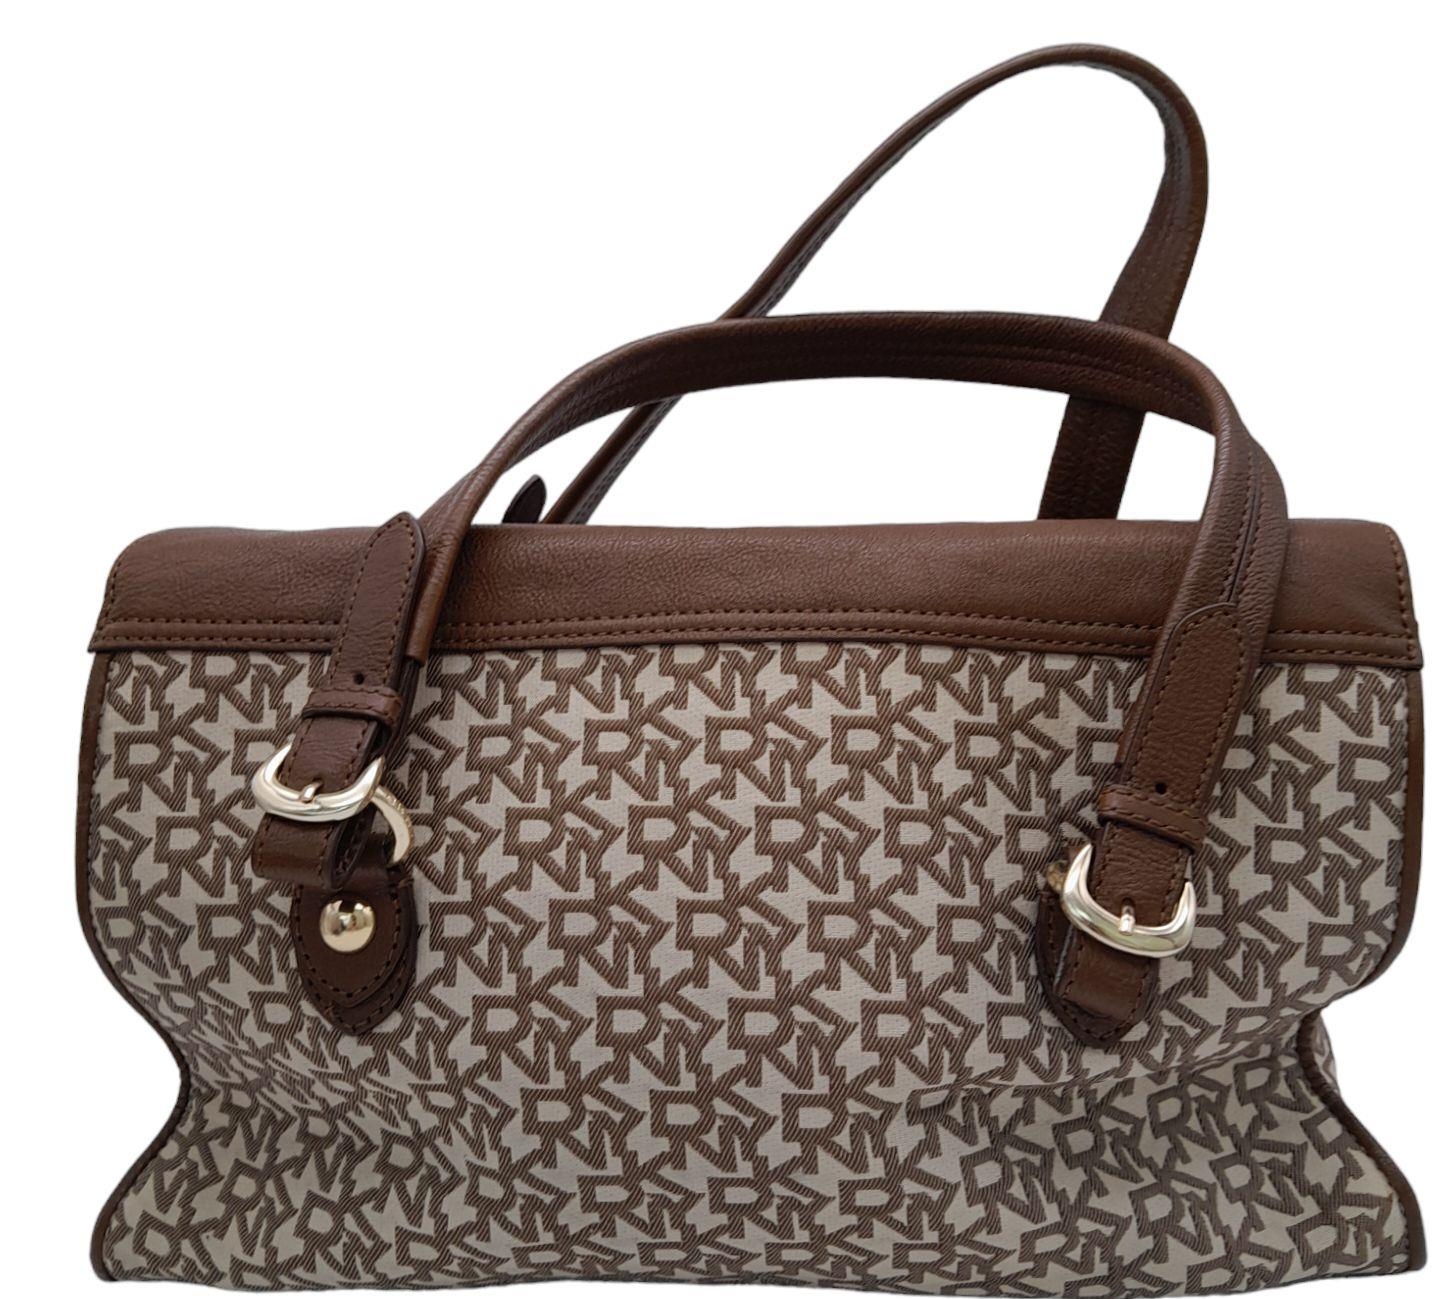 A DKNY Brown Satchel Bag. Canvas and leather exterior with gold-toned hardware, four protective base